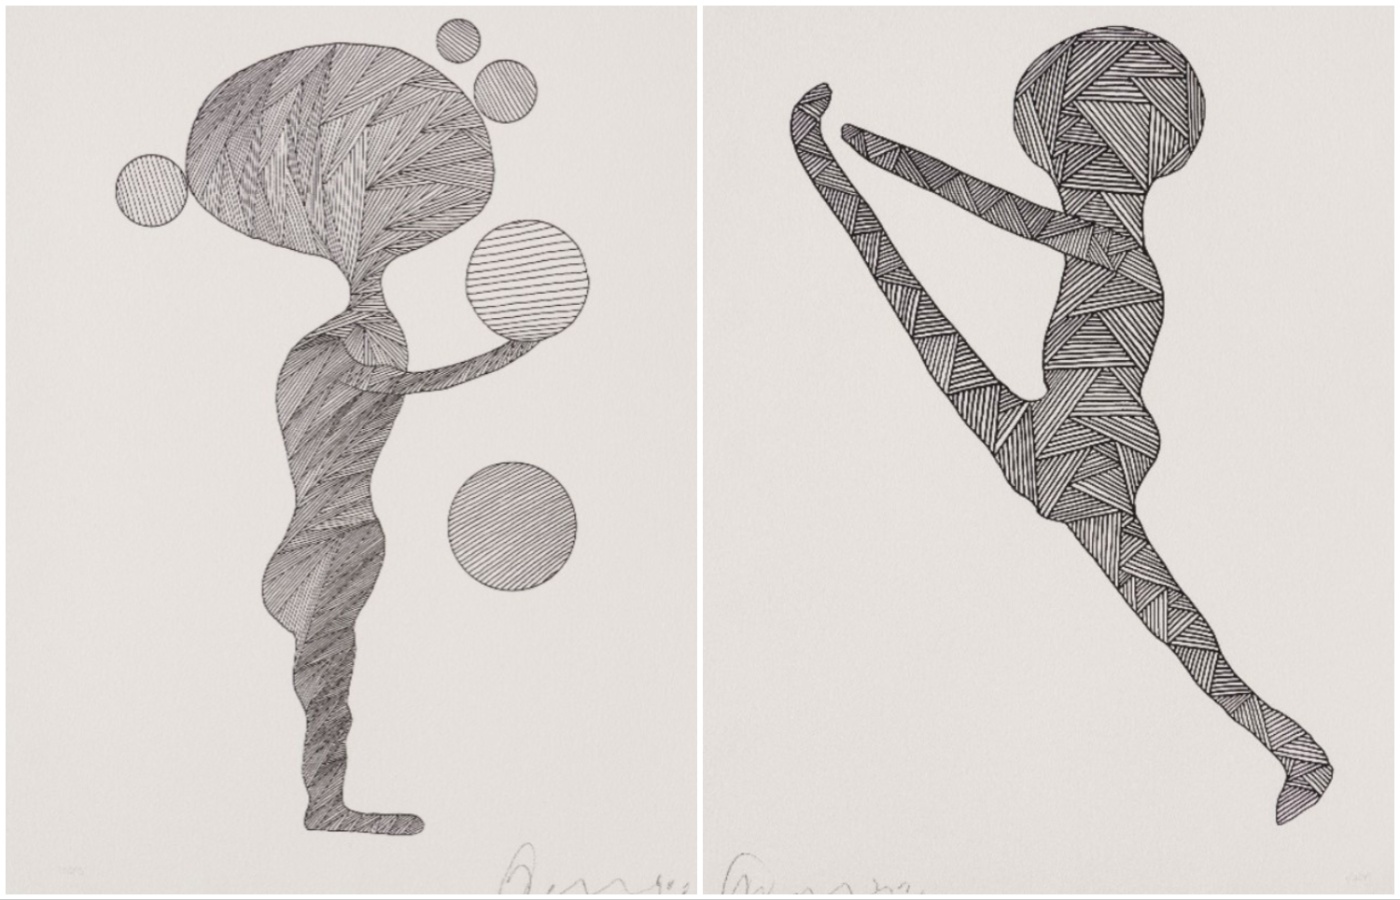 Two of the artworks from Billy Connolly: One-Armed Juggler and Pontius Tries Pilates.